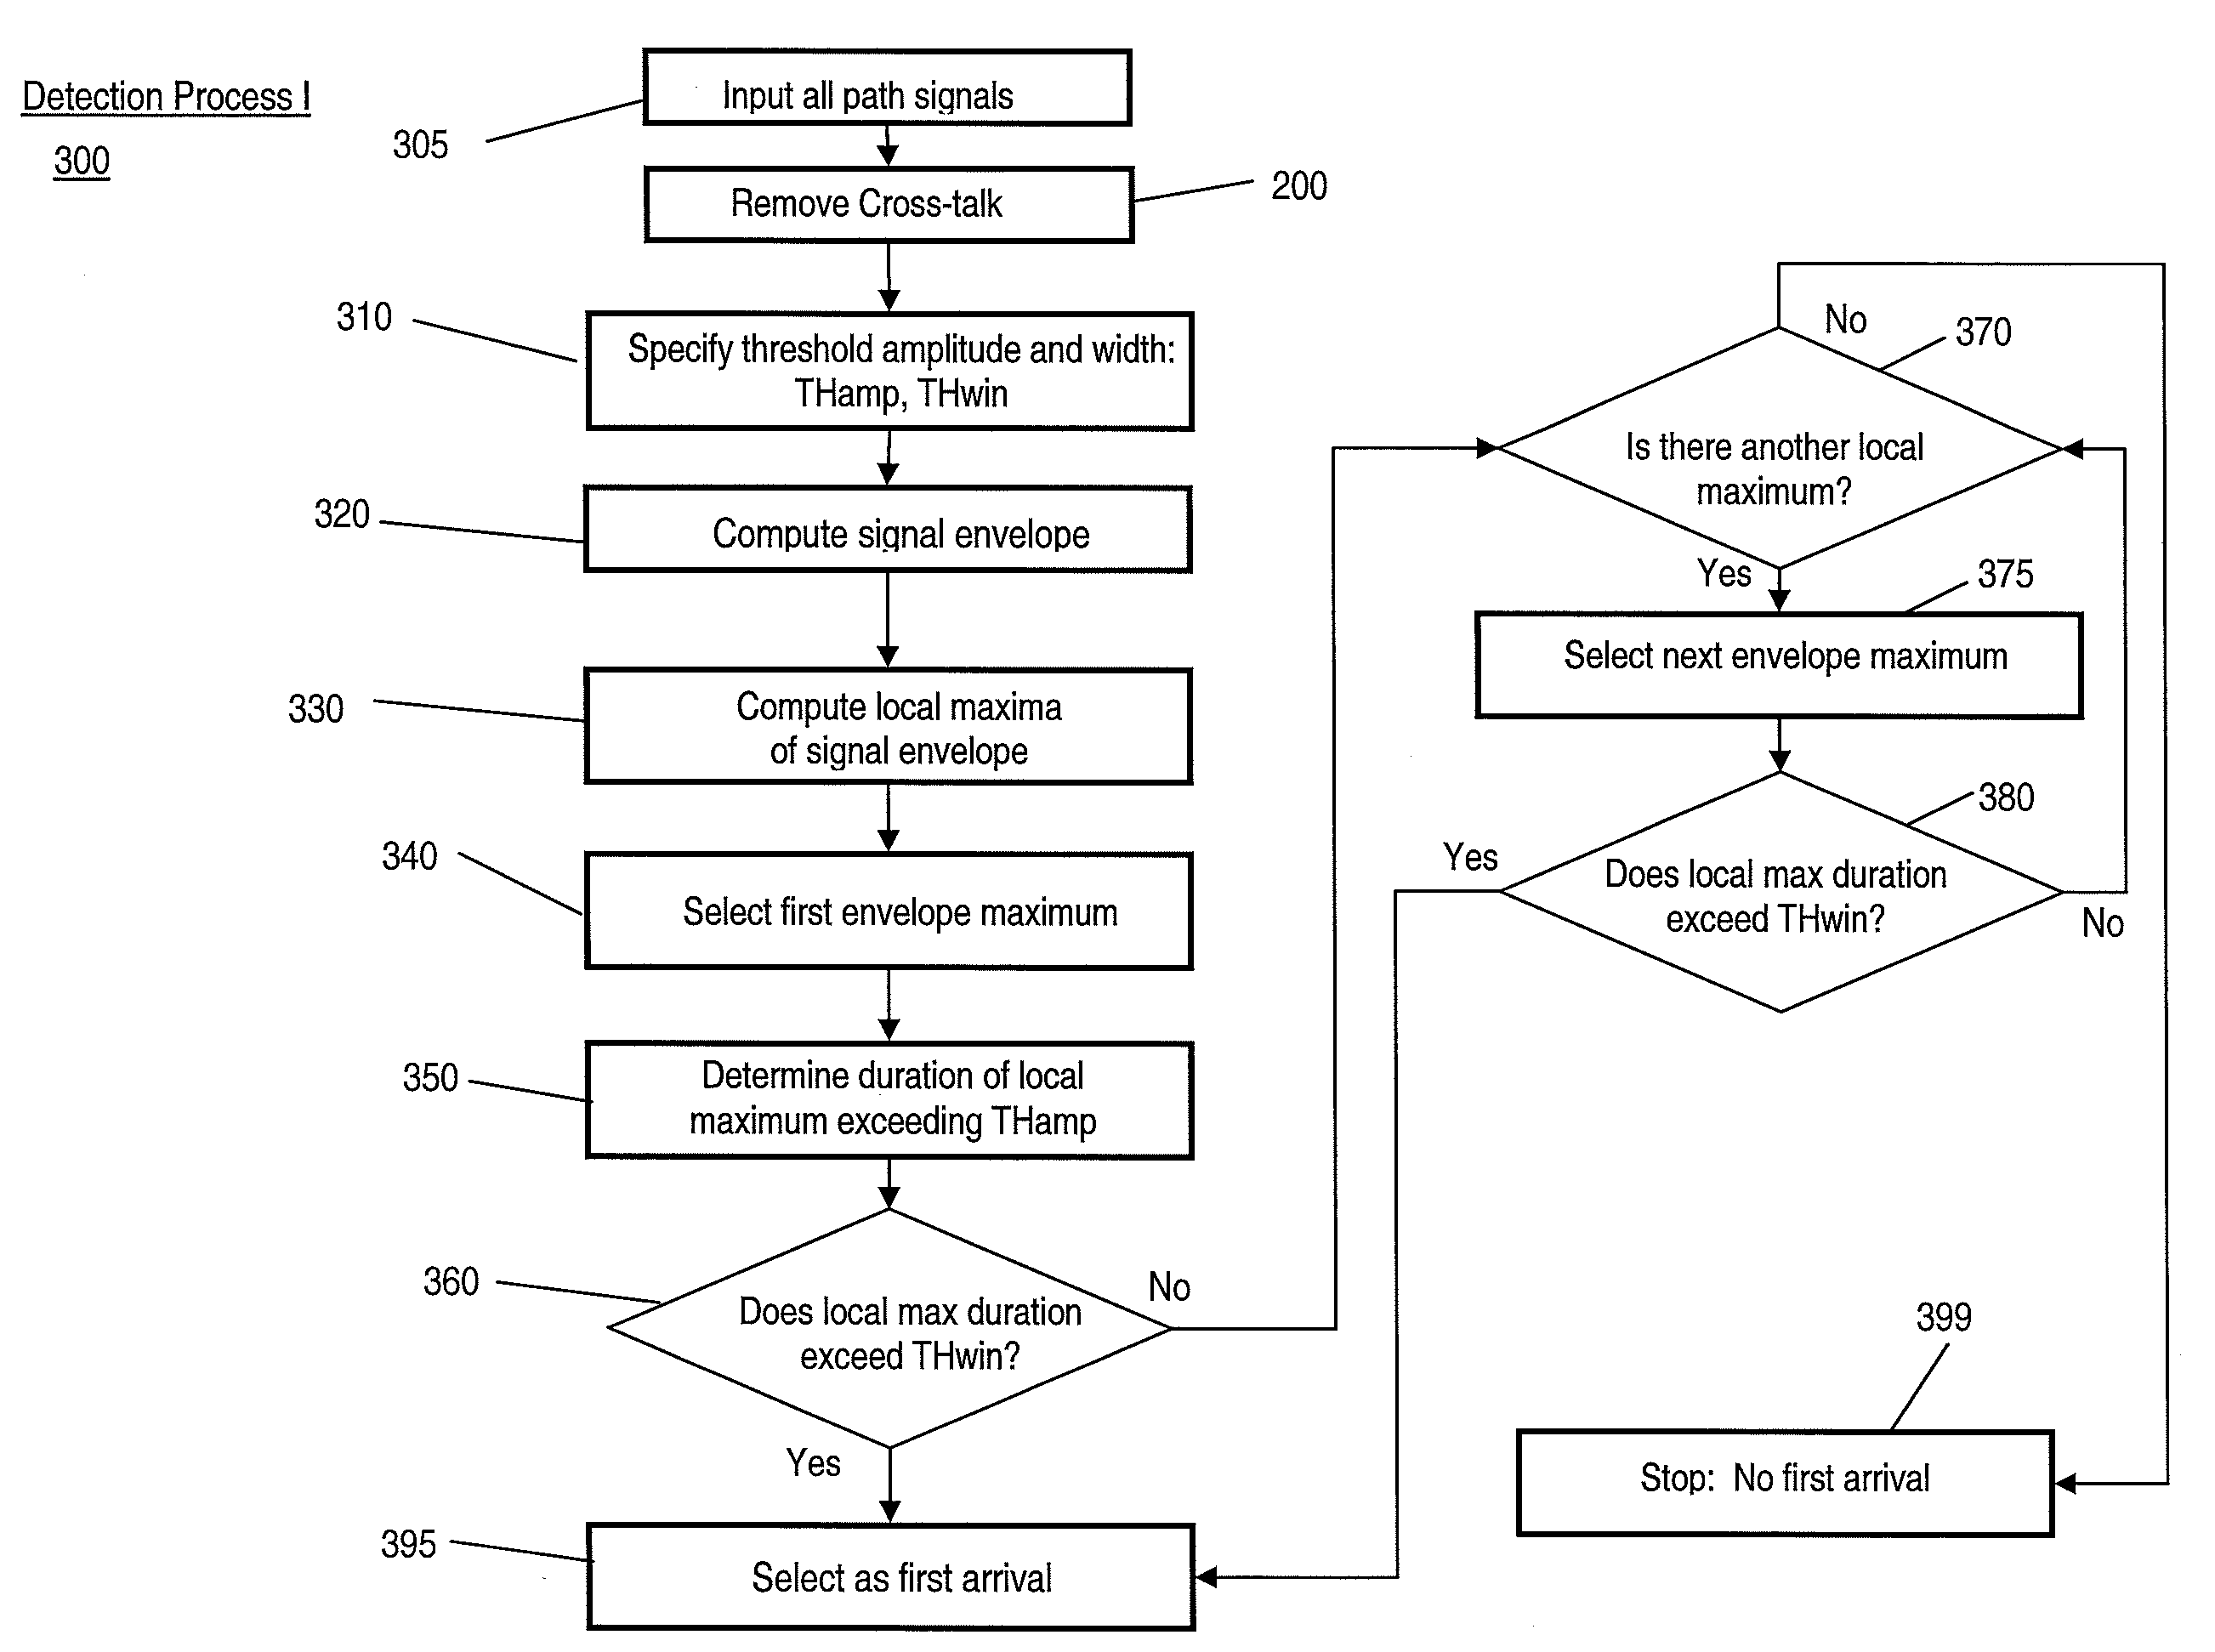 Methods and apparatus for extracting first arrival wave packets in a structural health monitoring system